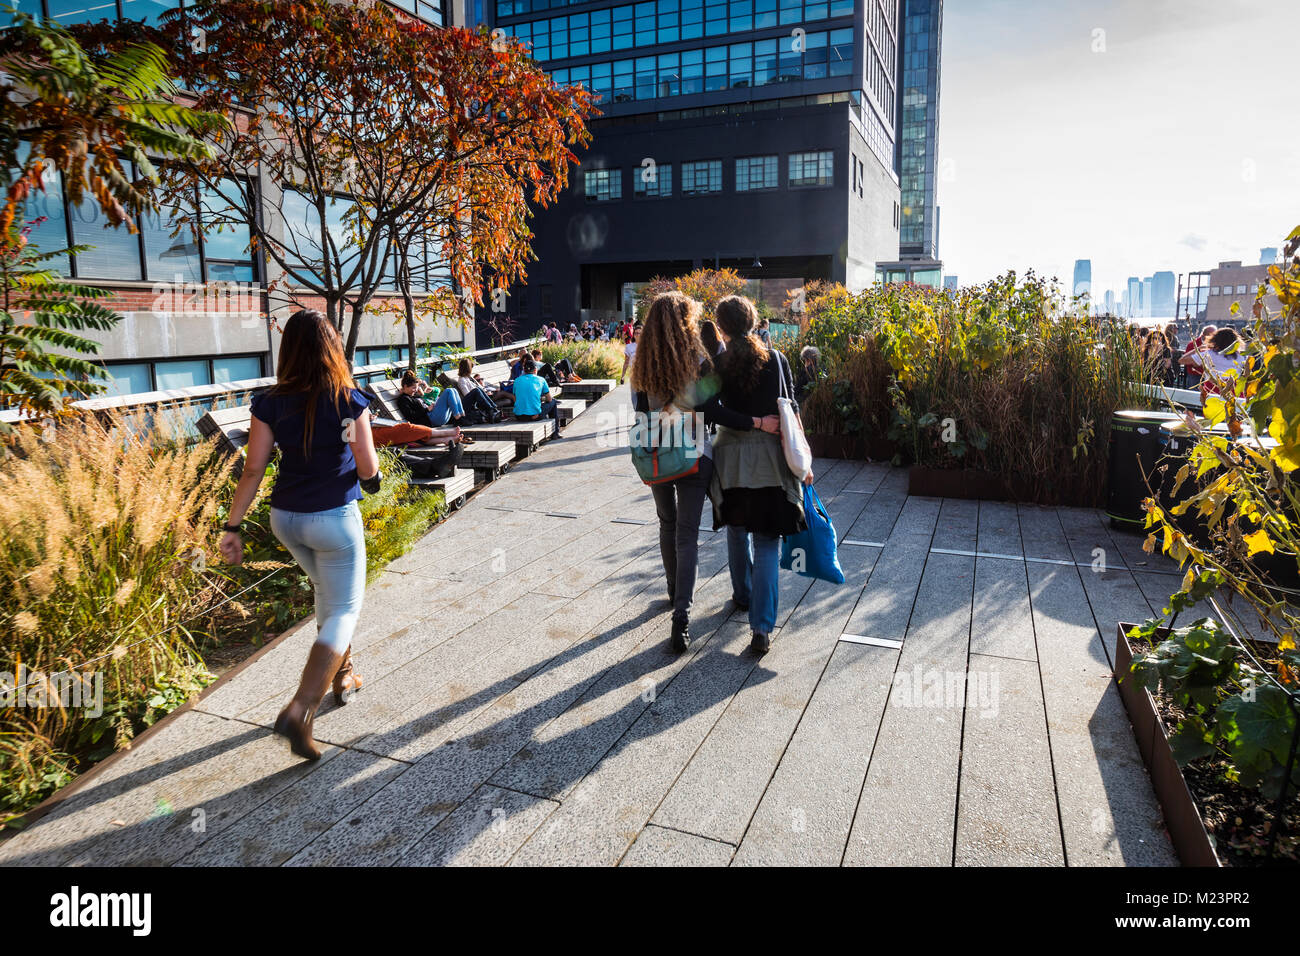 People enjoying free time on High Line park in New York City Stock Photo